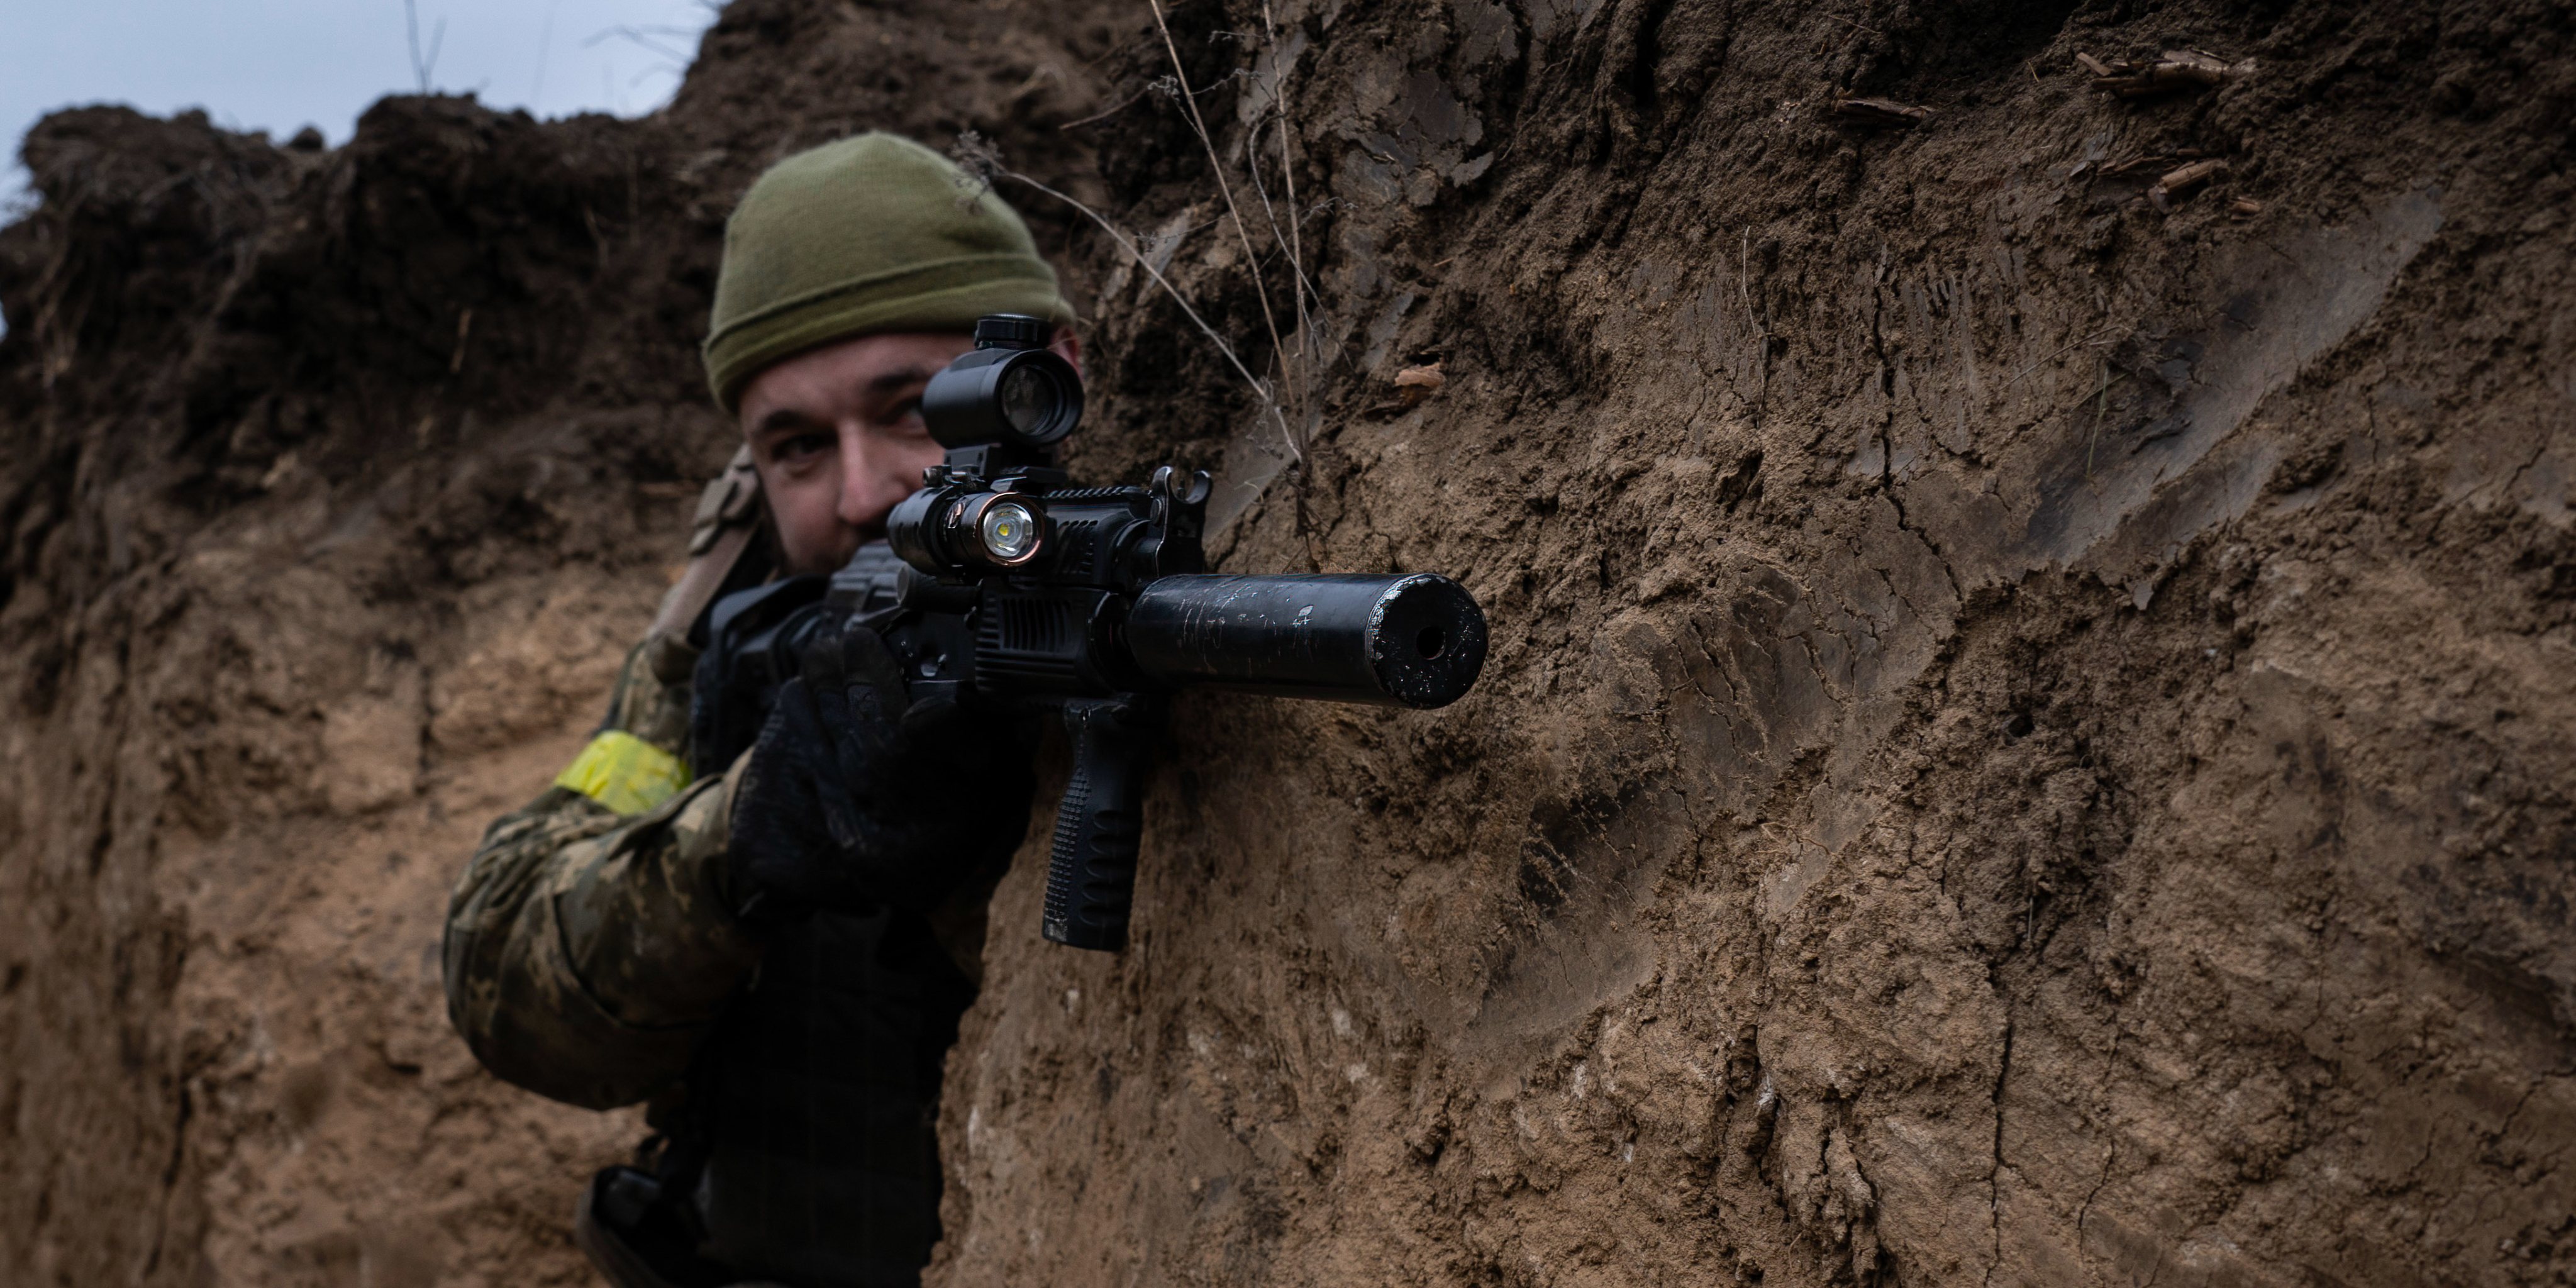 A Ukrainian soldier from the 63 brigades is seen having